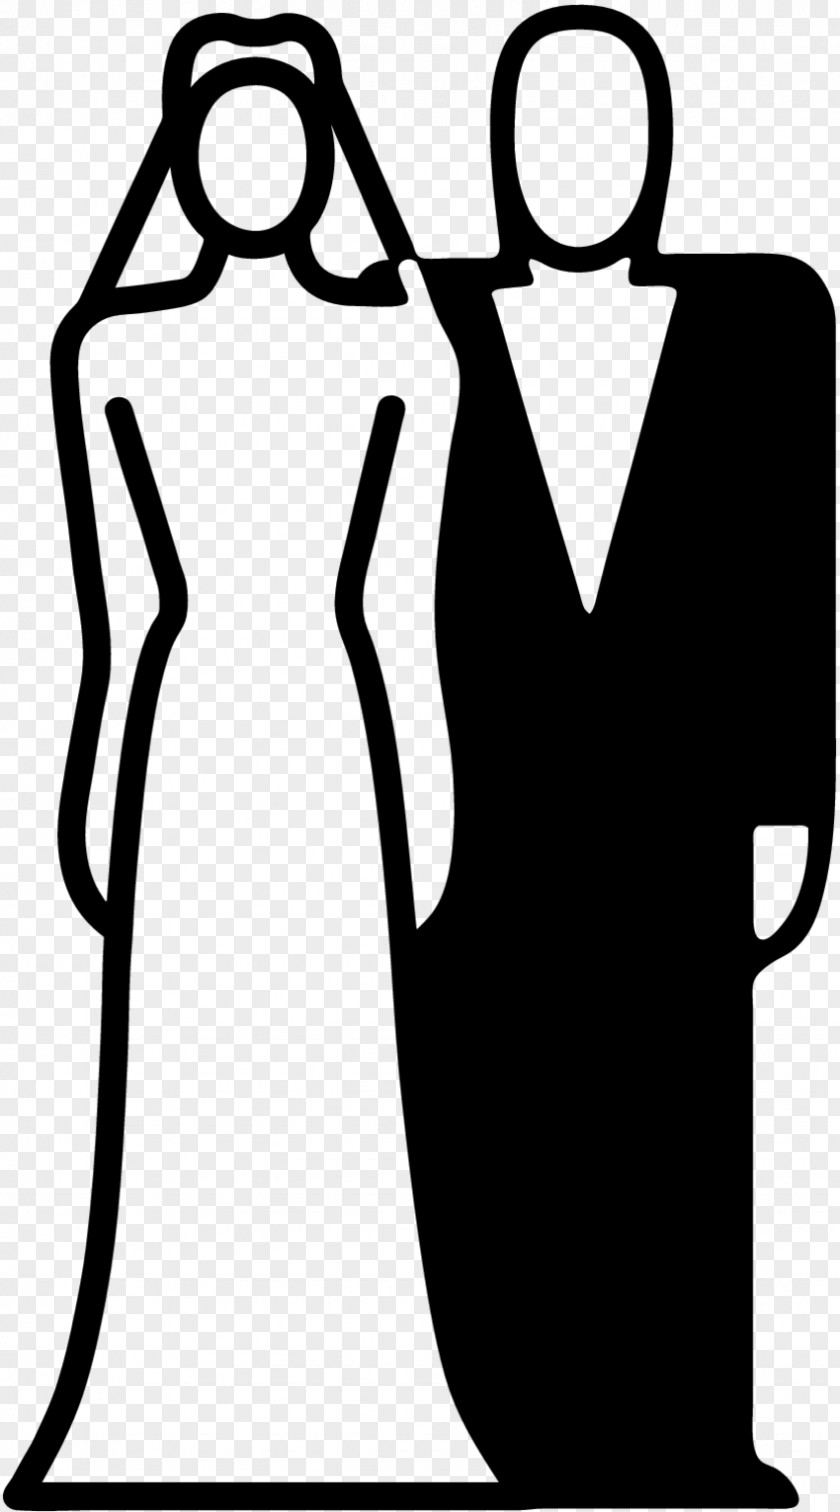 Bride Free Vector Material Silhouette Woman Clip Art PNG